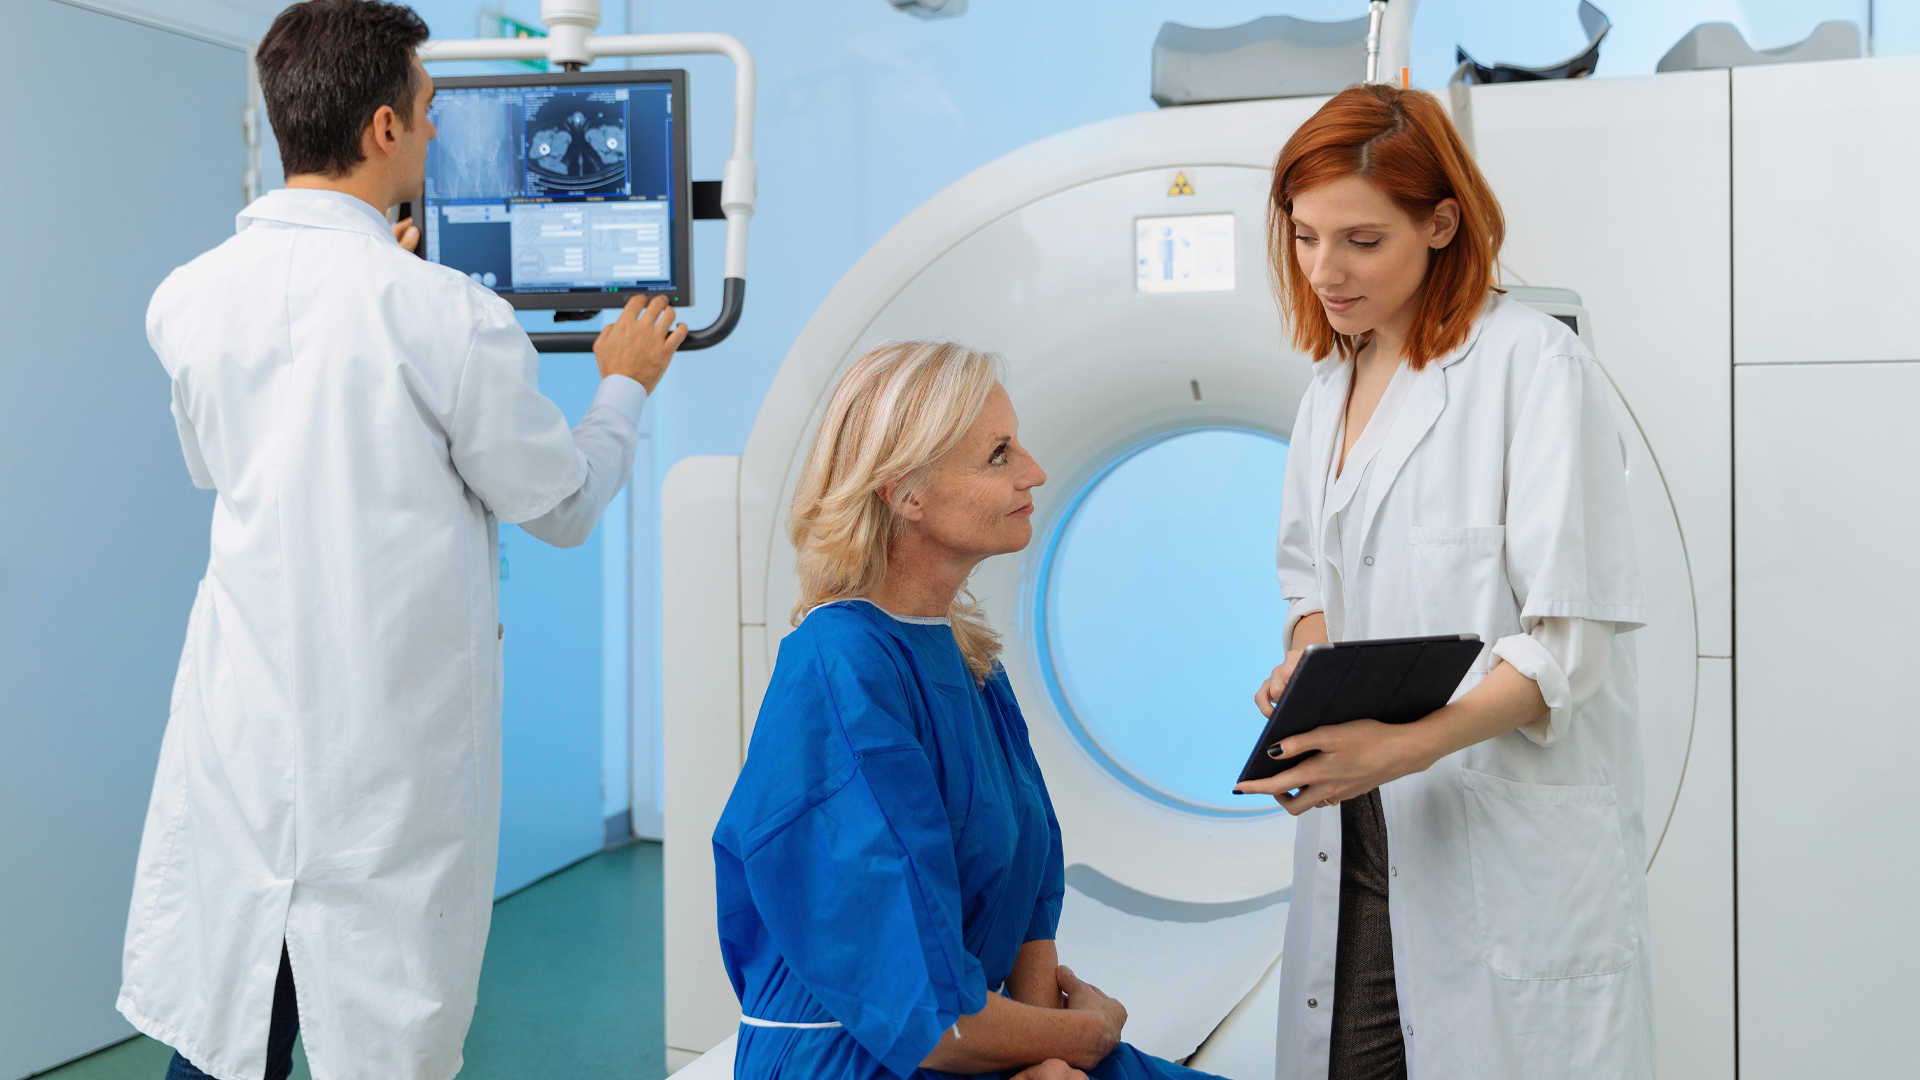 TUG Test Can Be Feasibly Implemented in Radiology Workflows to Promote Fall Risk Prevention